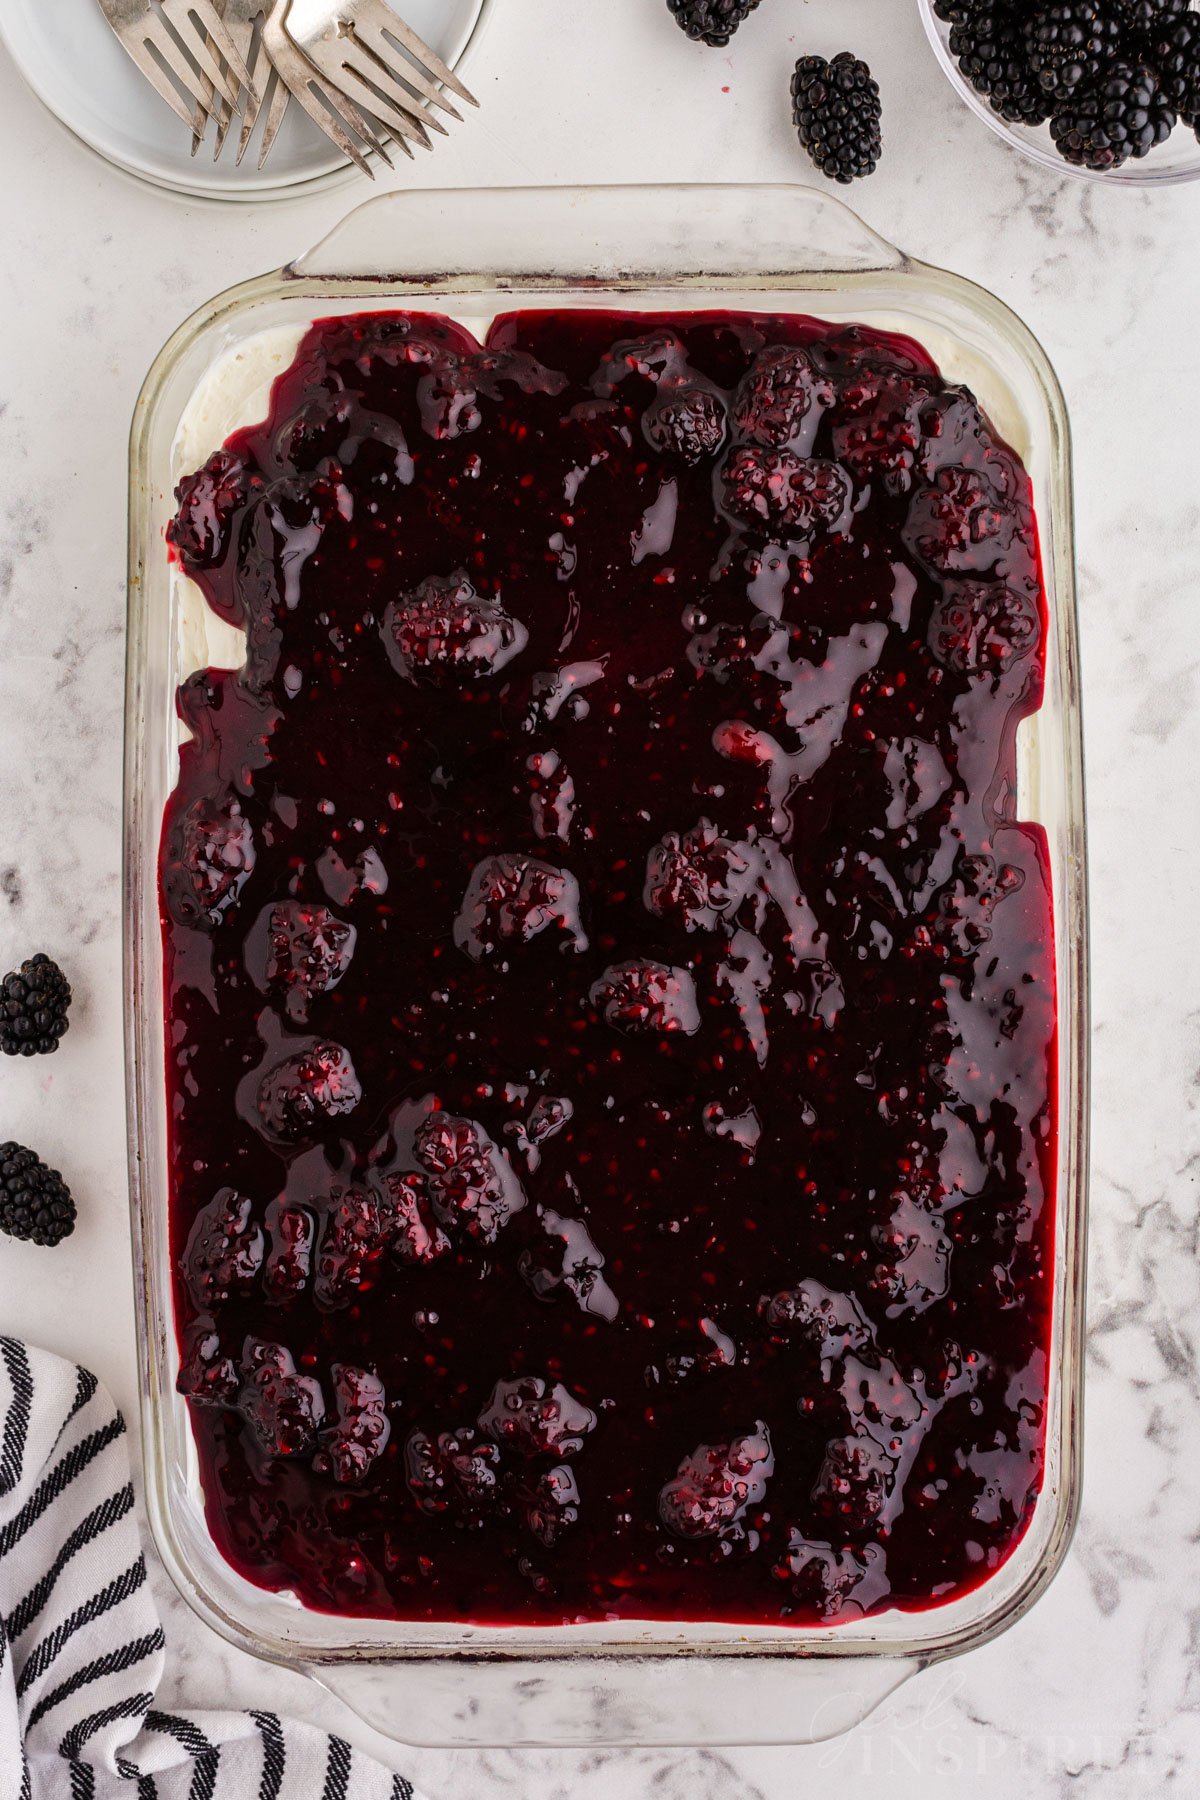 Assembled no bake blackberry cheesecake in glass baking dish, with plates, forks, and bowl of blackberries.